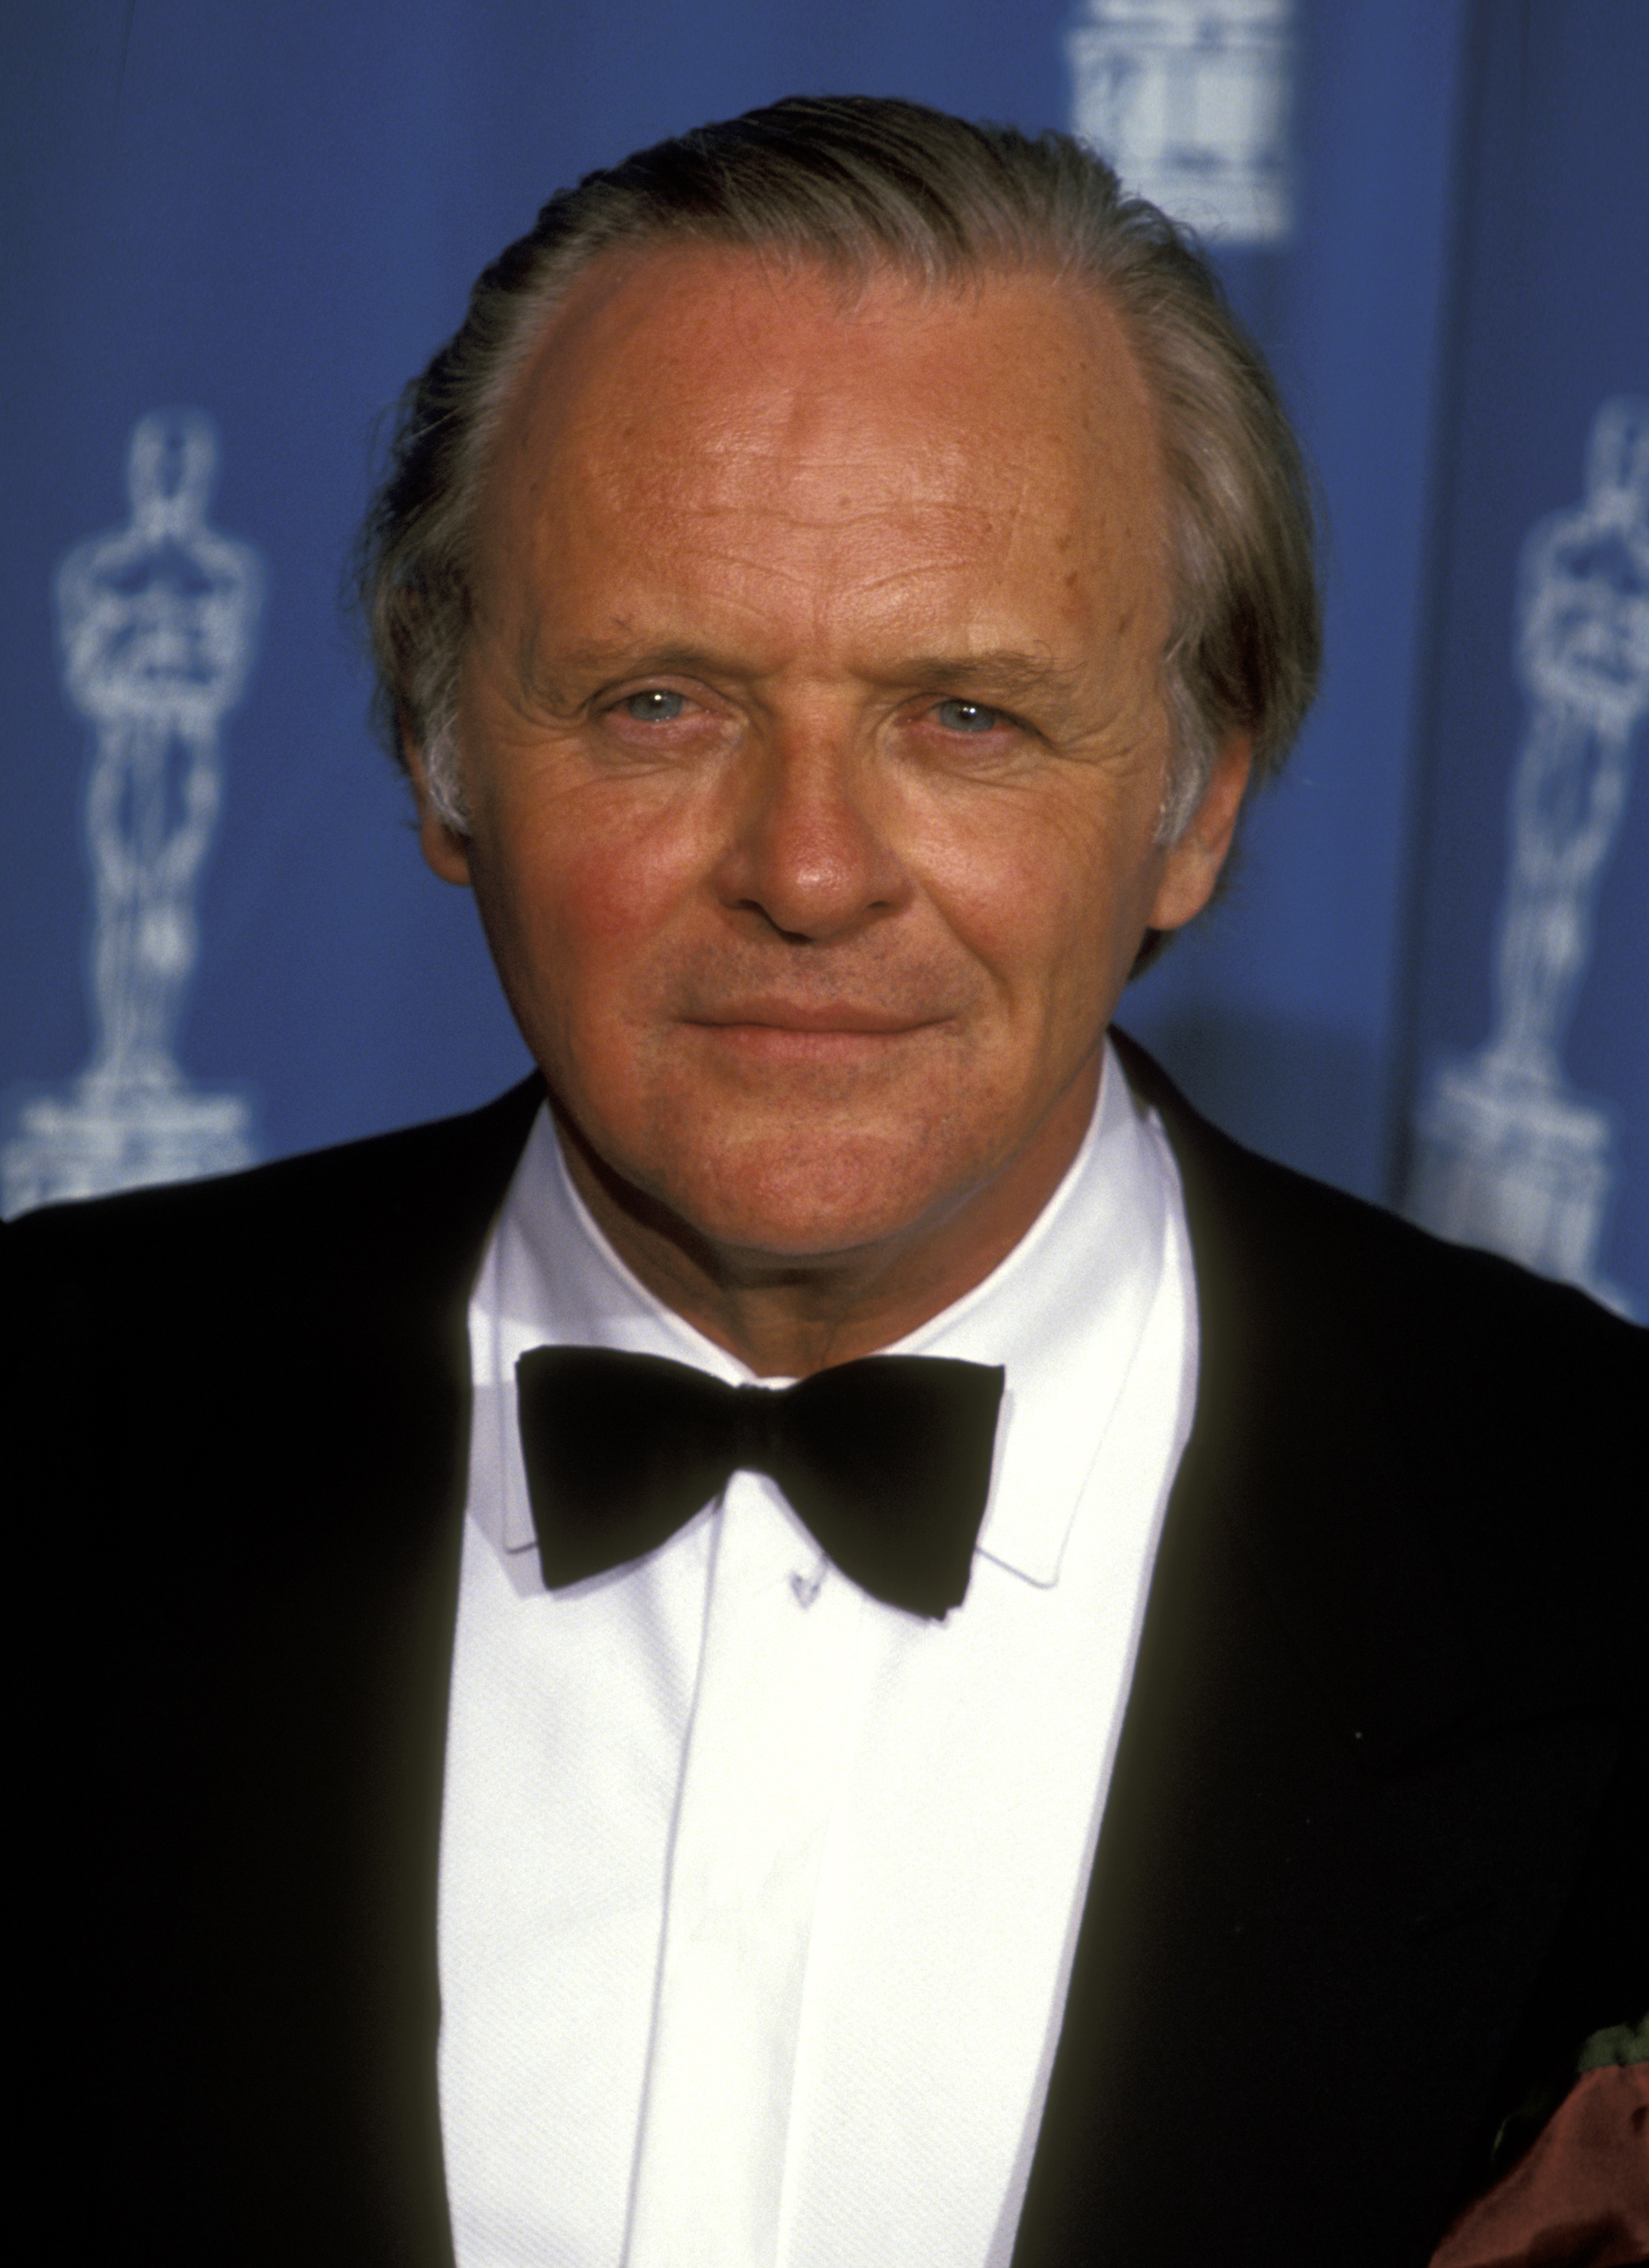 Anthony Hopkins at The 67th Annual Academy Awards held at the Shrine Auditorium in Los Angeles, California | Source: Getty Images